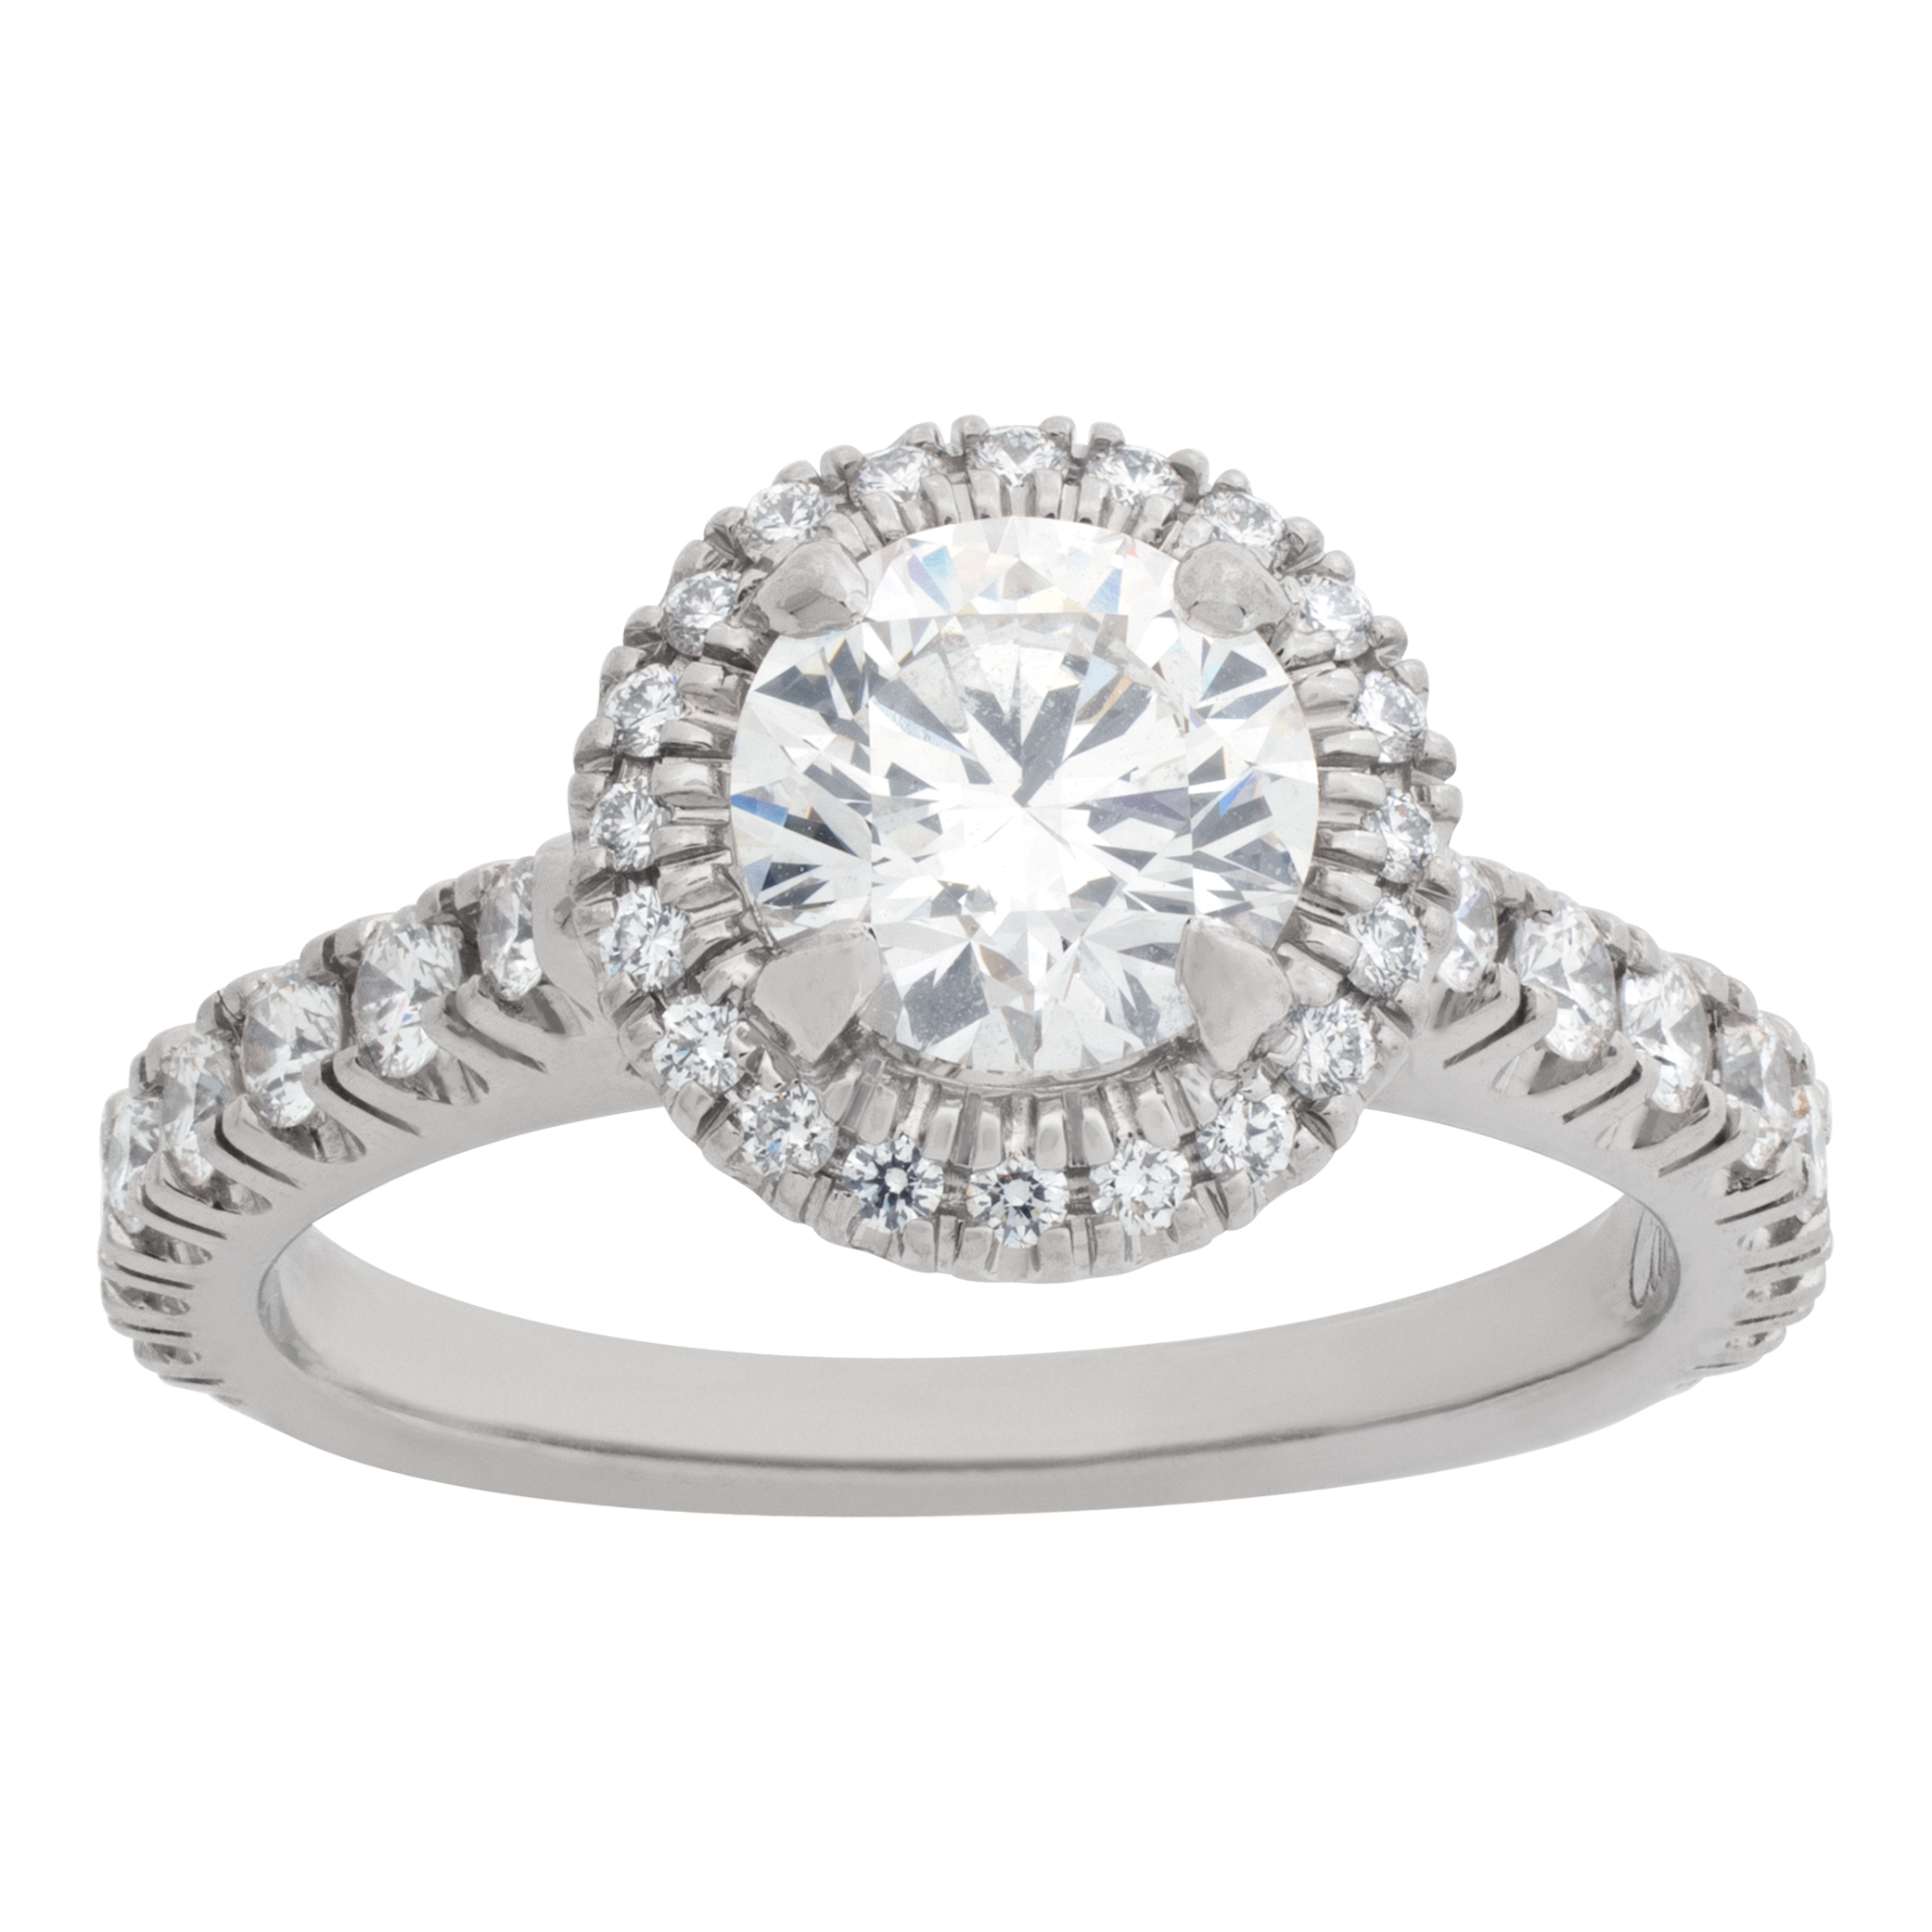 Cartier "Destinee" collection, GIA certified 0.73 caratt full ct round brilliant diamond set in a halo platinum setting. image 1